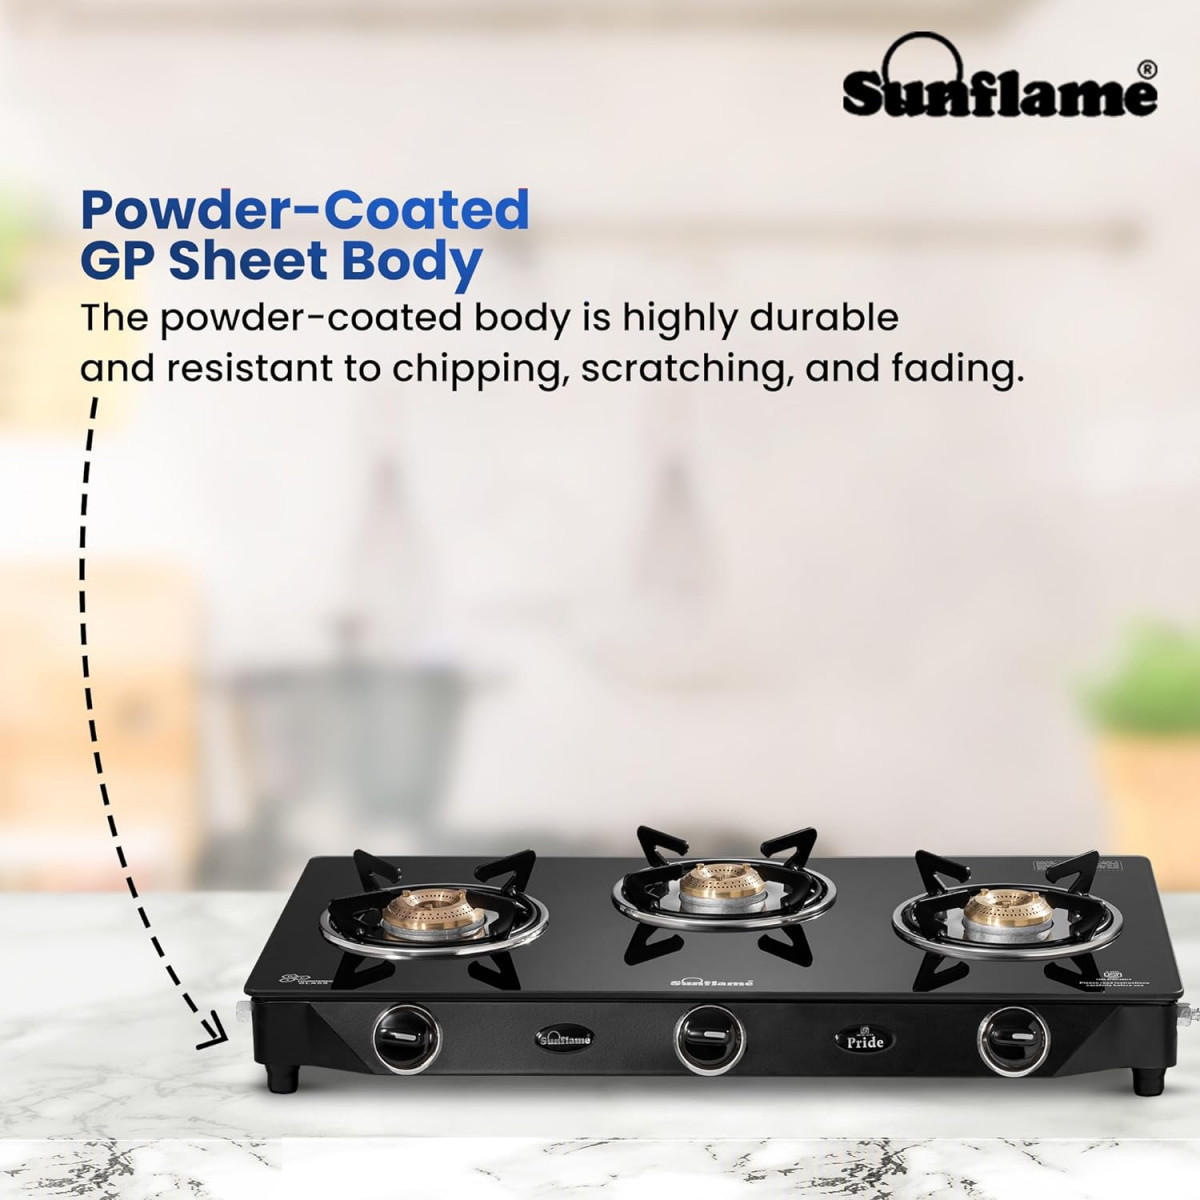 Sunflame Pride 3 Burner Gas Stove  2-Years Product Coverage  2 Small and 1 Medium Brass Burners  Ergonomic Knobs  Easy to Maintain l Toughened Glass Top  PAN India Presence  Black